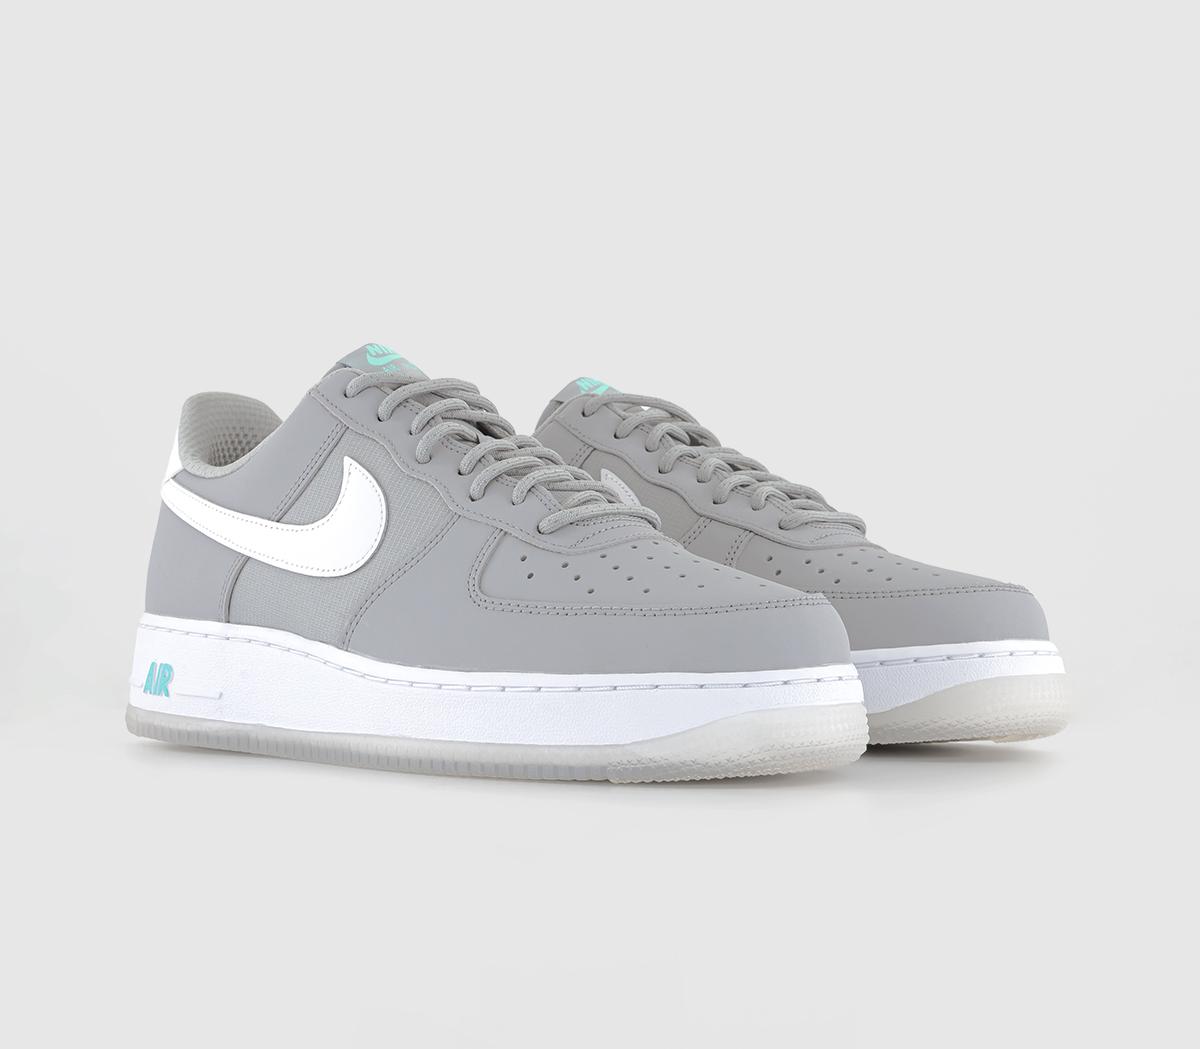 Nike Air Force 1 ’07 Trainers Wolf Grey White Hyper Turquoise, 8